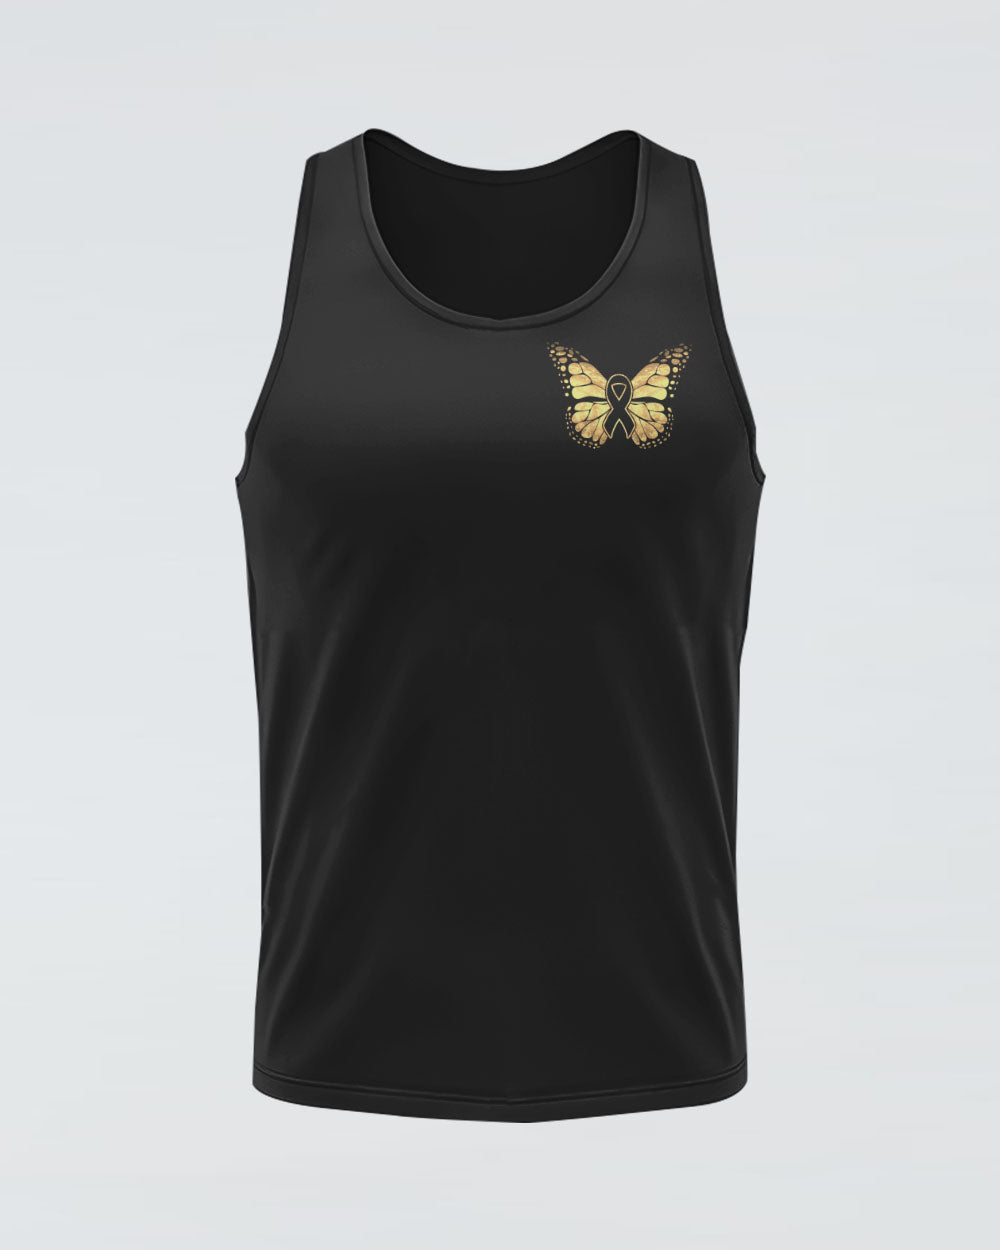 Love Hope Cure Butterfly Ribbon Women's Childhood Cancer Awareness Tanks